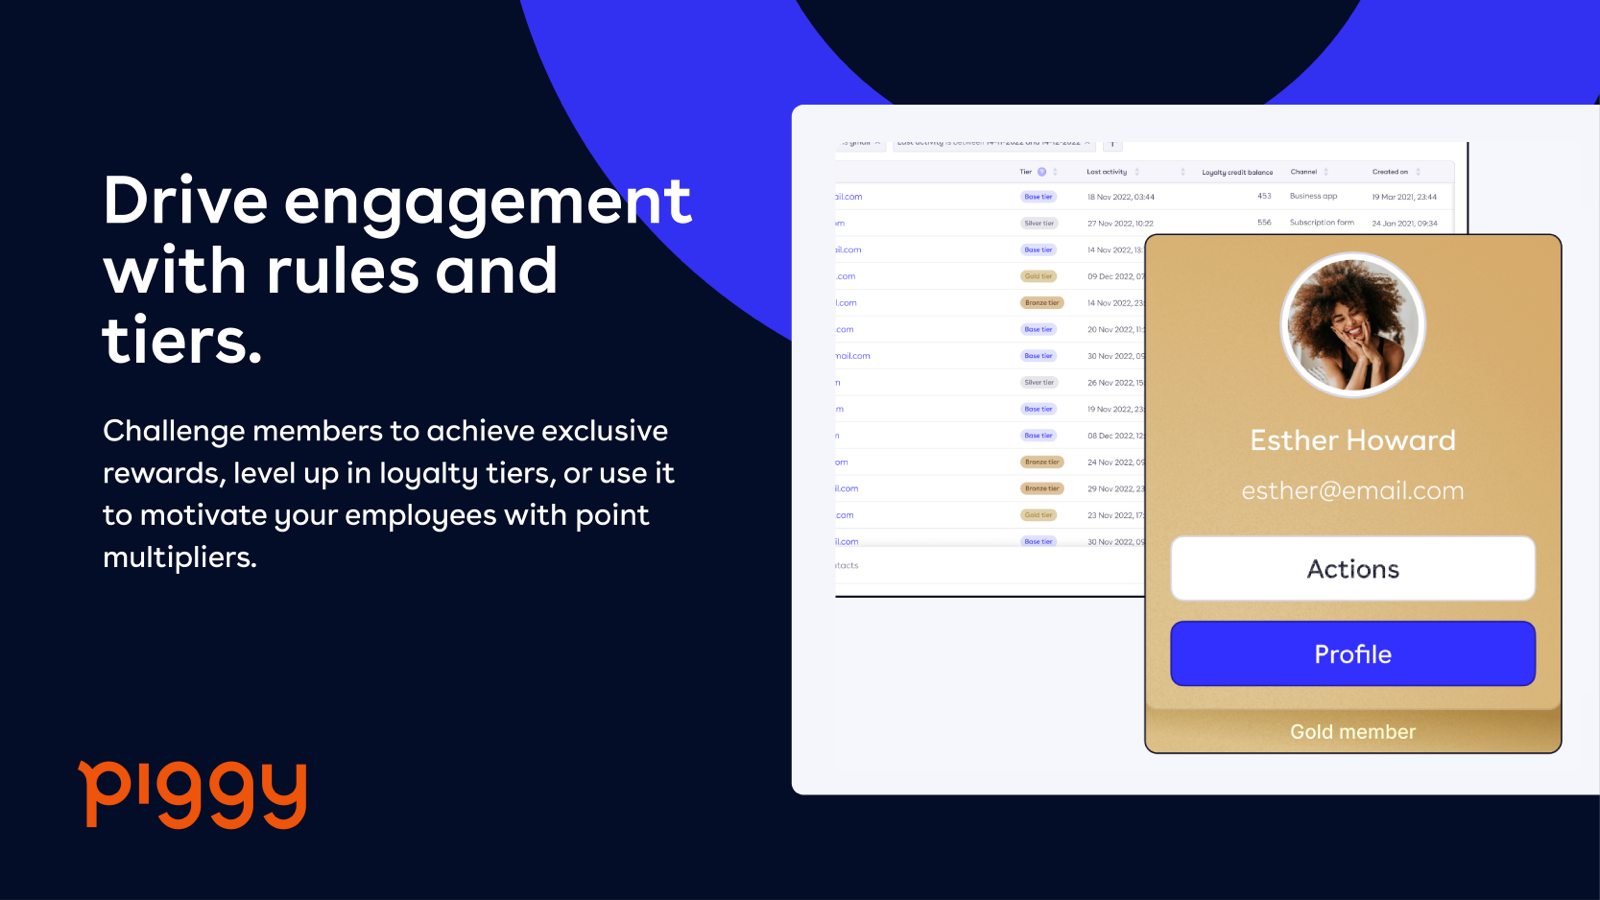 Drive engagement with rules and tiers